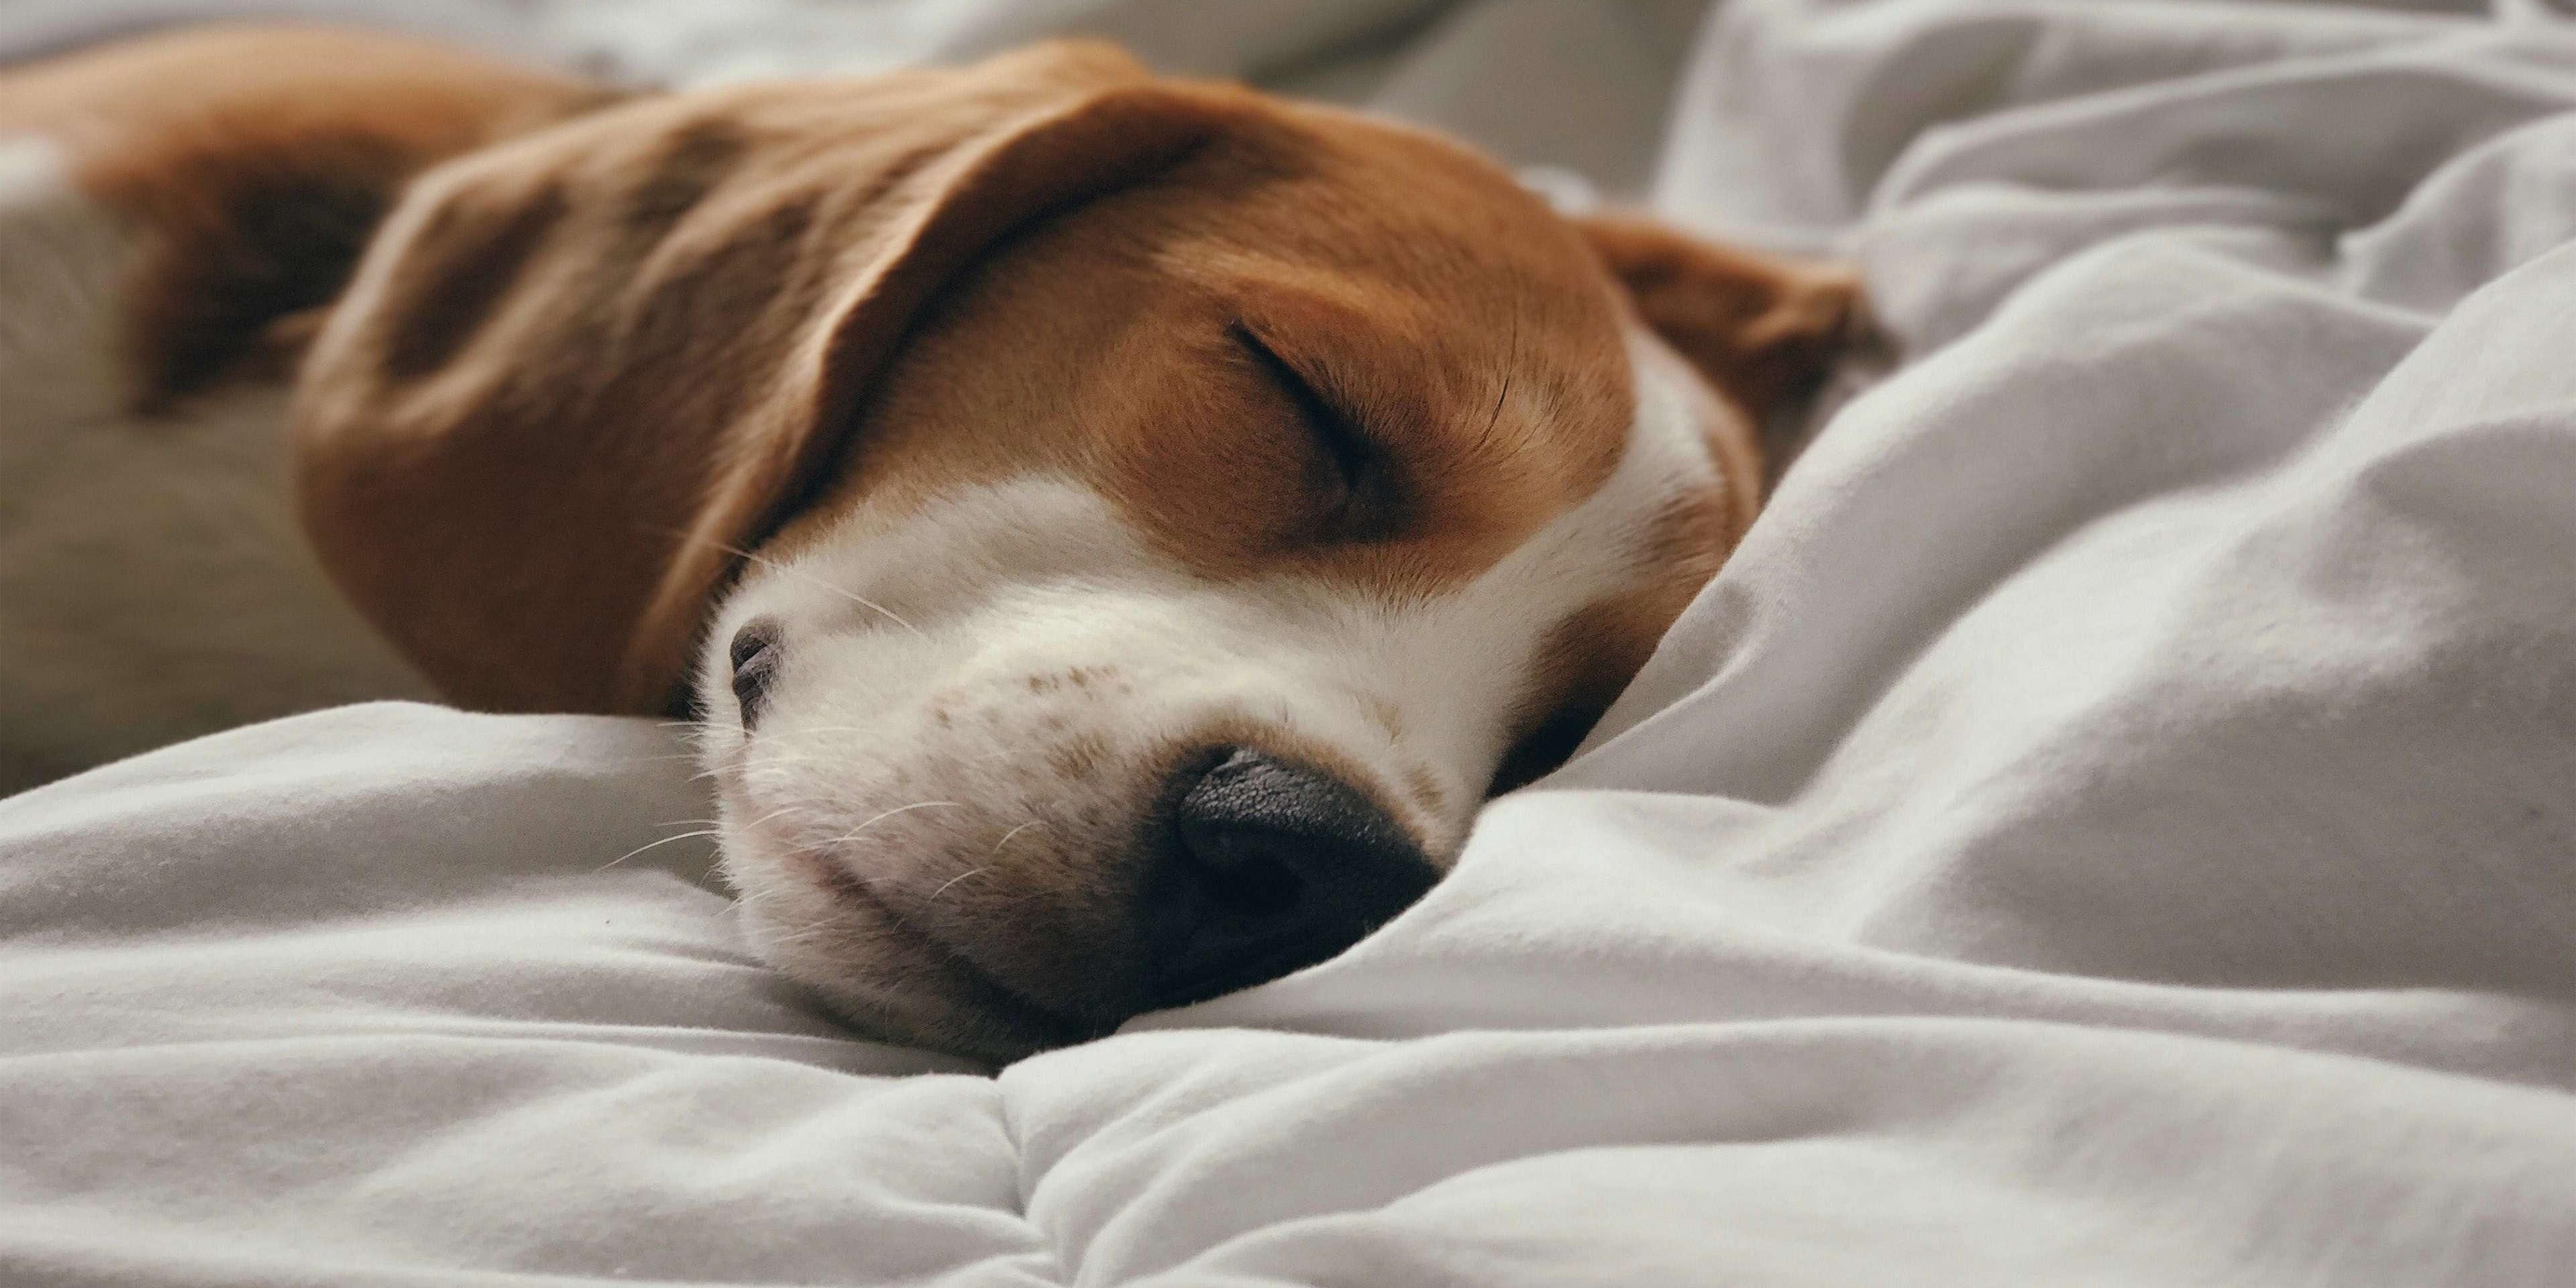 Pets are welcome at our hotel, by prior arrangement. An additional charge of GBP 25 per pet per stay applies. Contact the hotel to check availability.